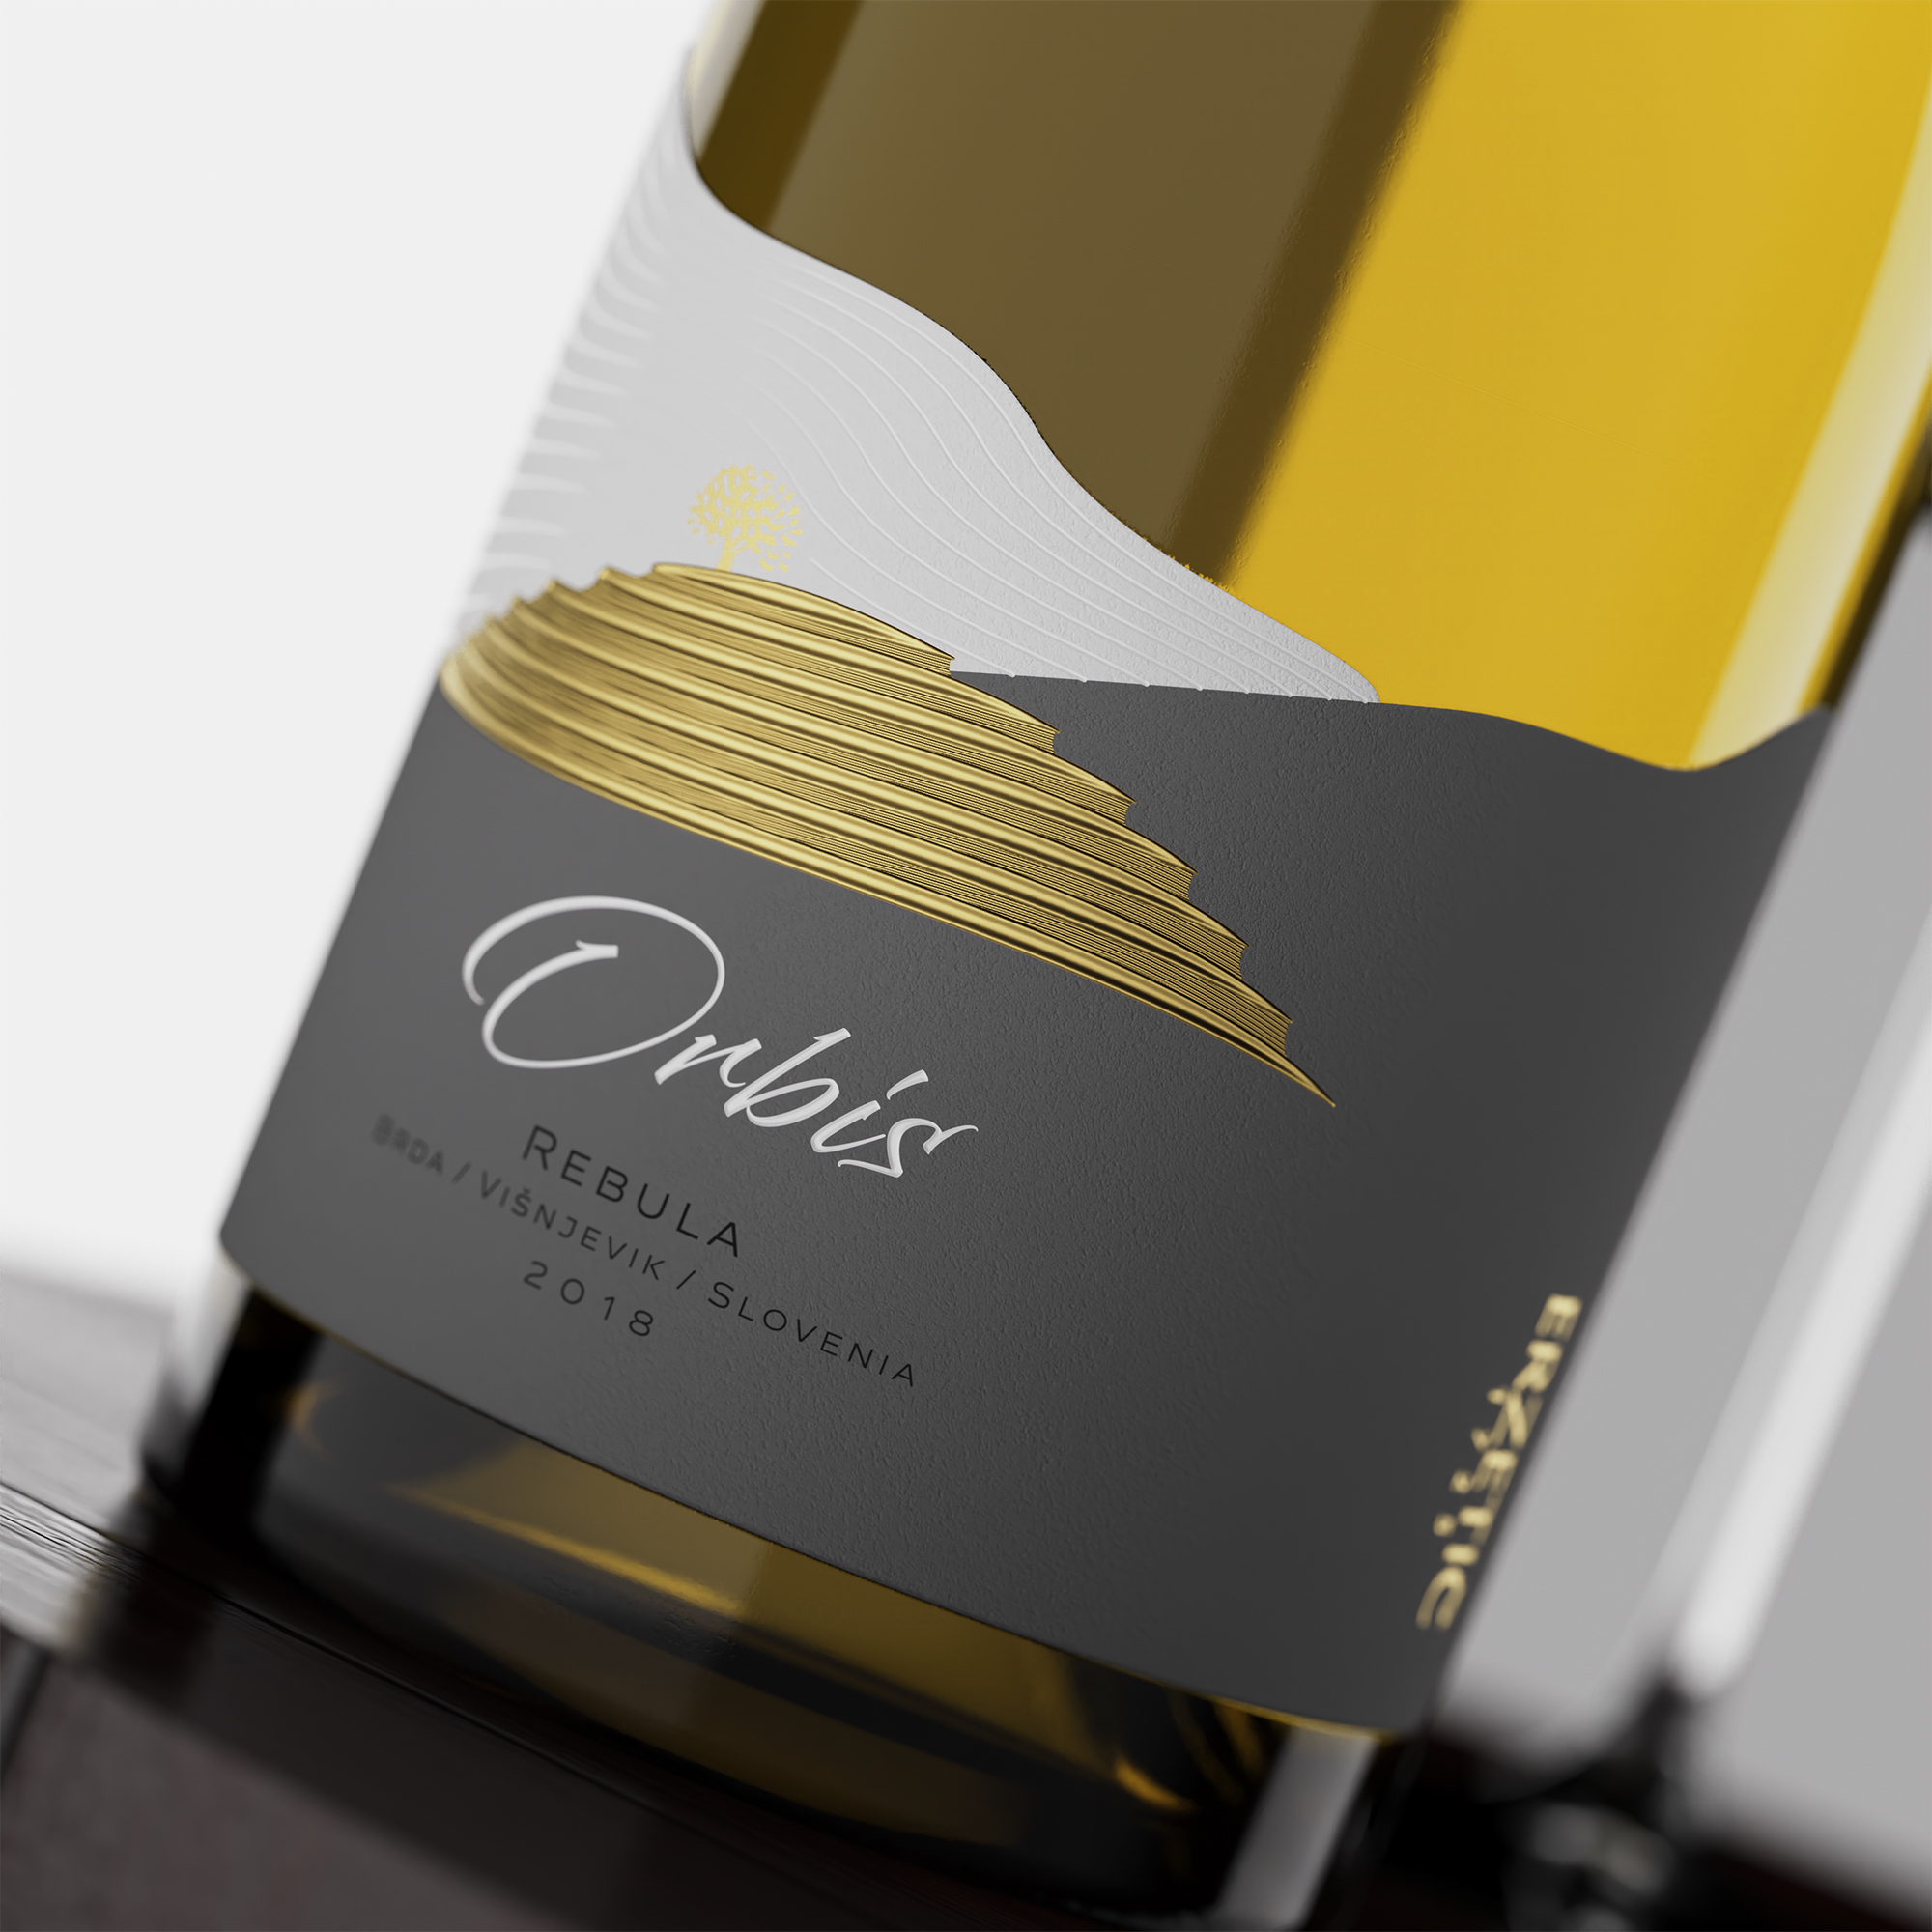 Orbis Wines The Great Peak of Erzetic Winery Label Design Created by the Labelmaker